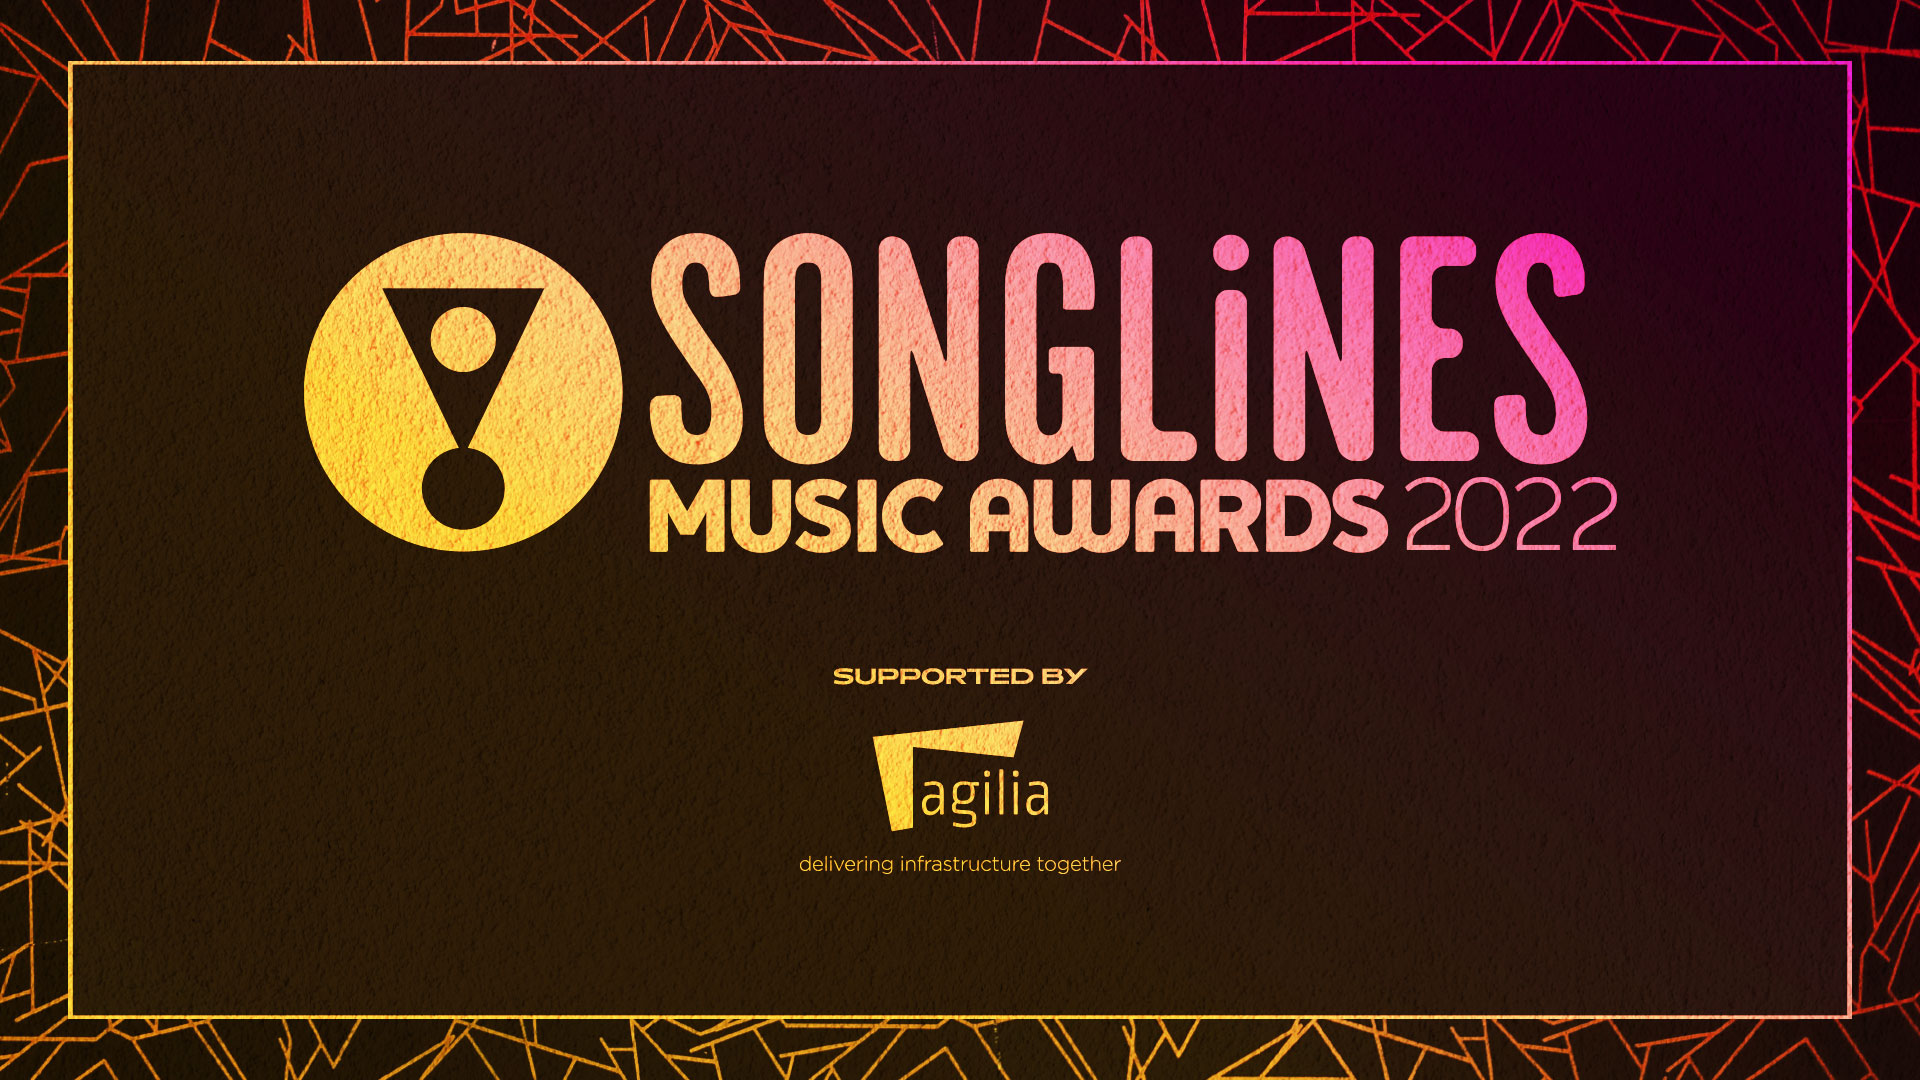 Songlines Music Awards 2022: The Live Show (Highlights Video) | Songlines